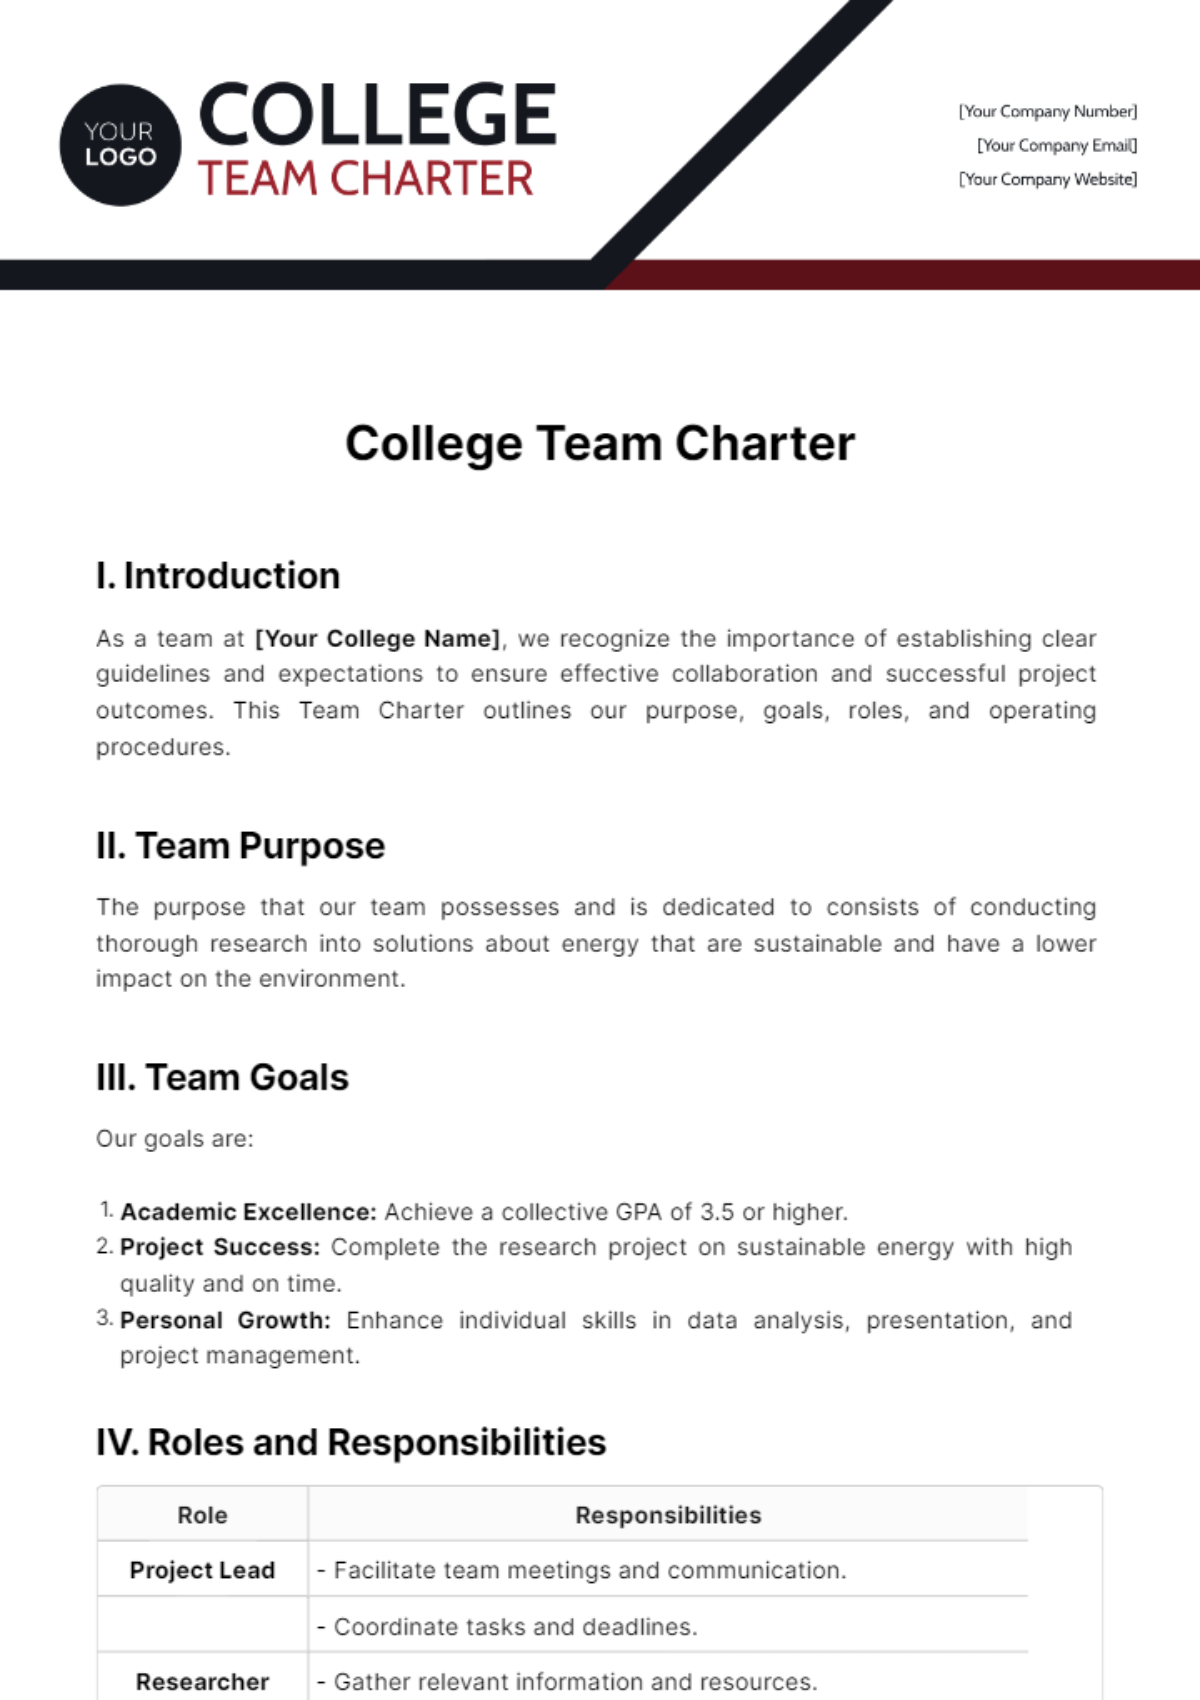 College Team Charter Template